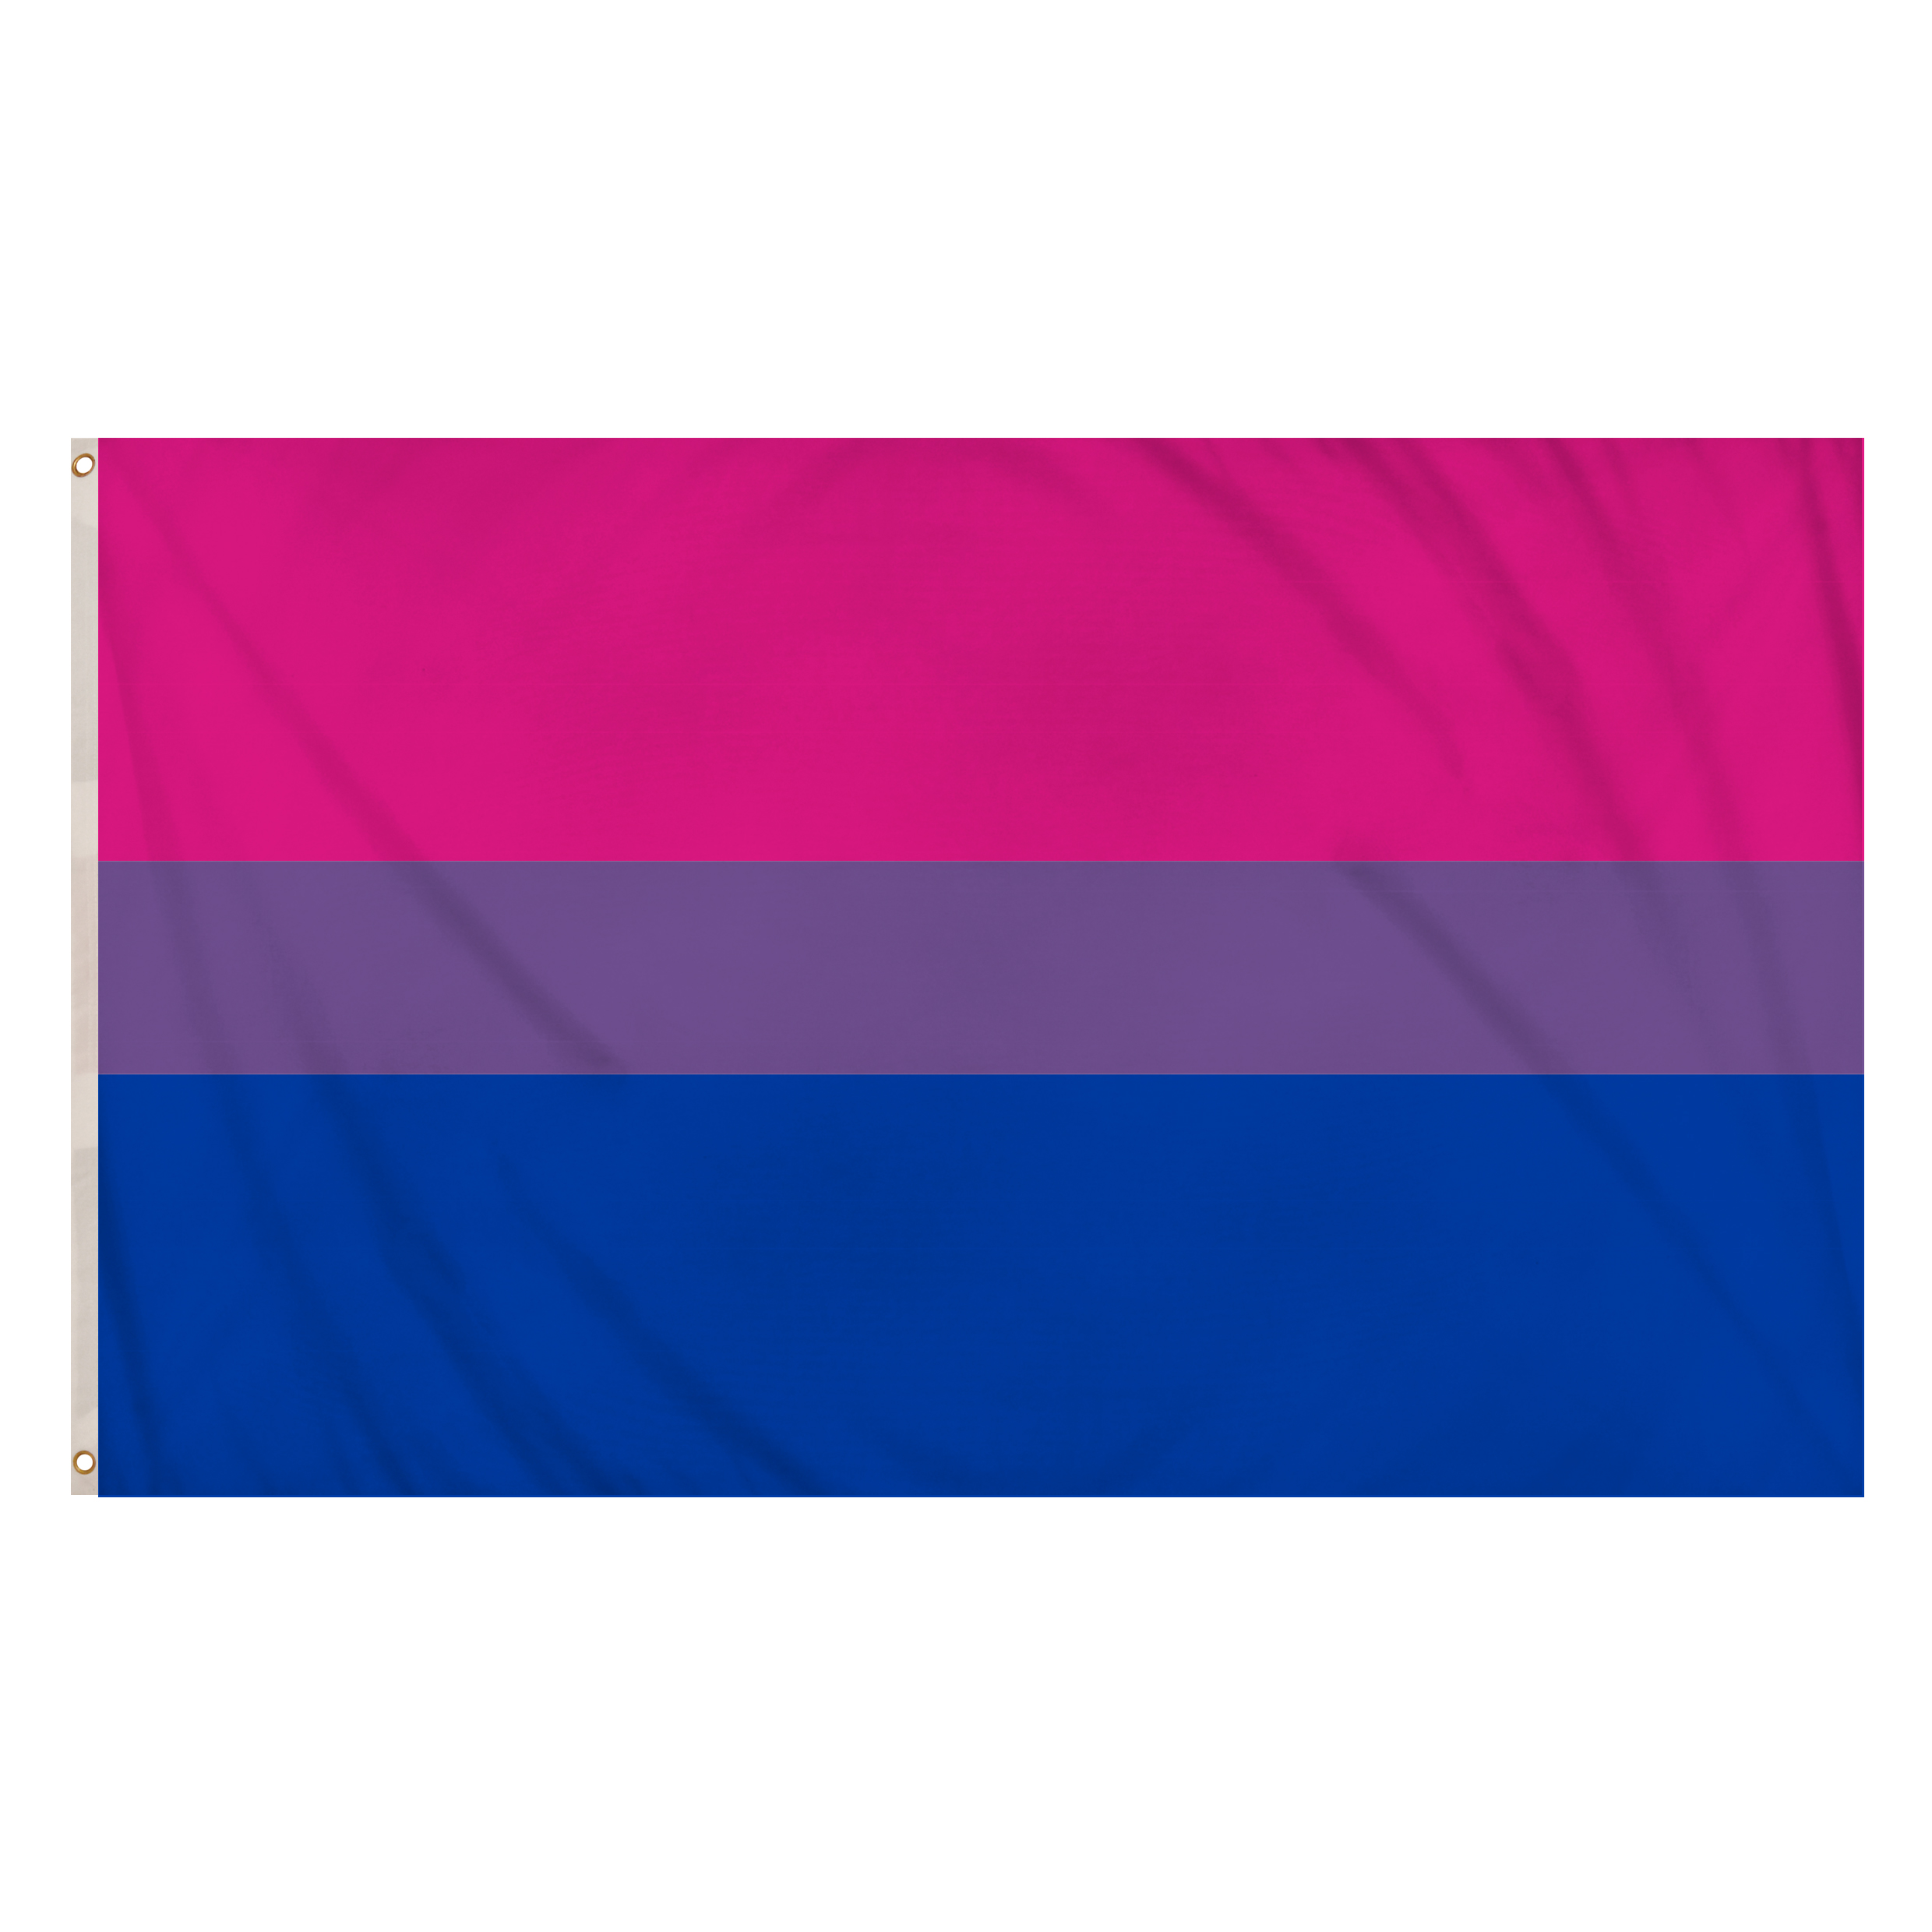 Bisexual Pride Bi Pride Lgbtq Flag 5ft X 3ft Polyester Double Stitched Seam Metal Eyelets